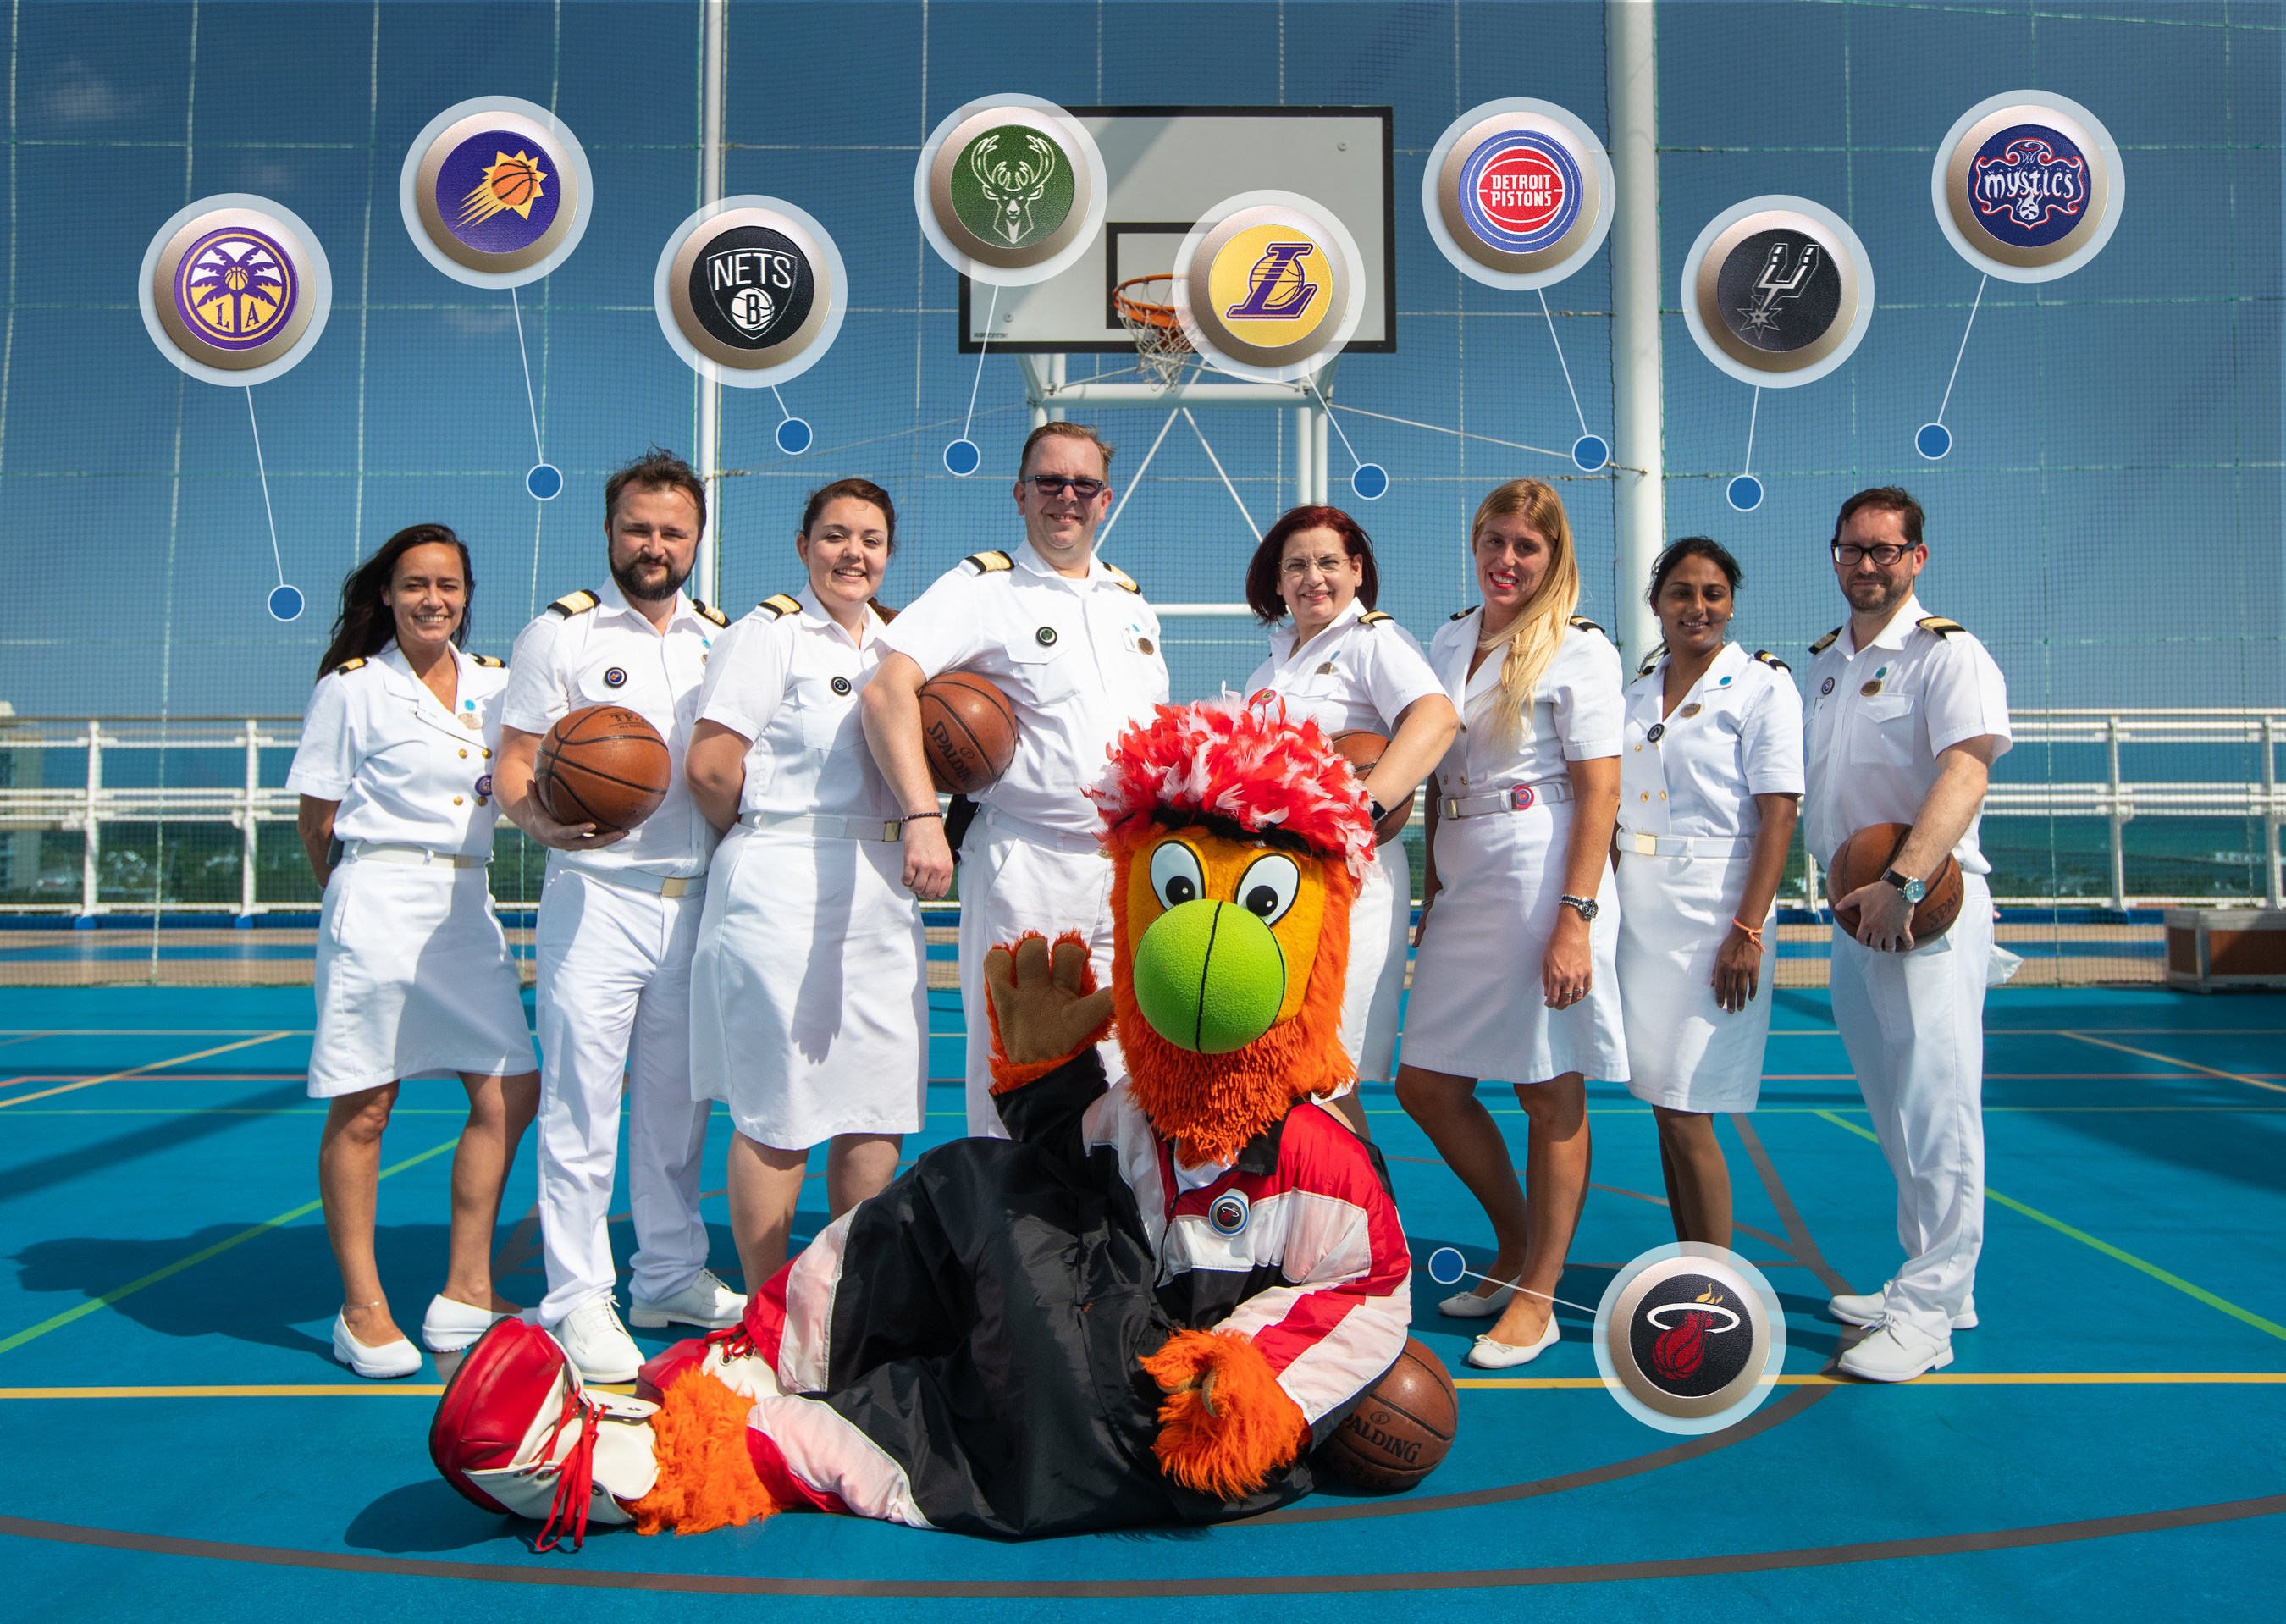 Princess Cruises Agreement with NBA Properties Lets Guests Customize Medallions with Their Favorite NBA and WNBA Teams - Miami Heat Mascot Burnie Visits Enchanted Princess in Ft. Lauderdale  (March 2022)